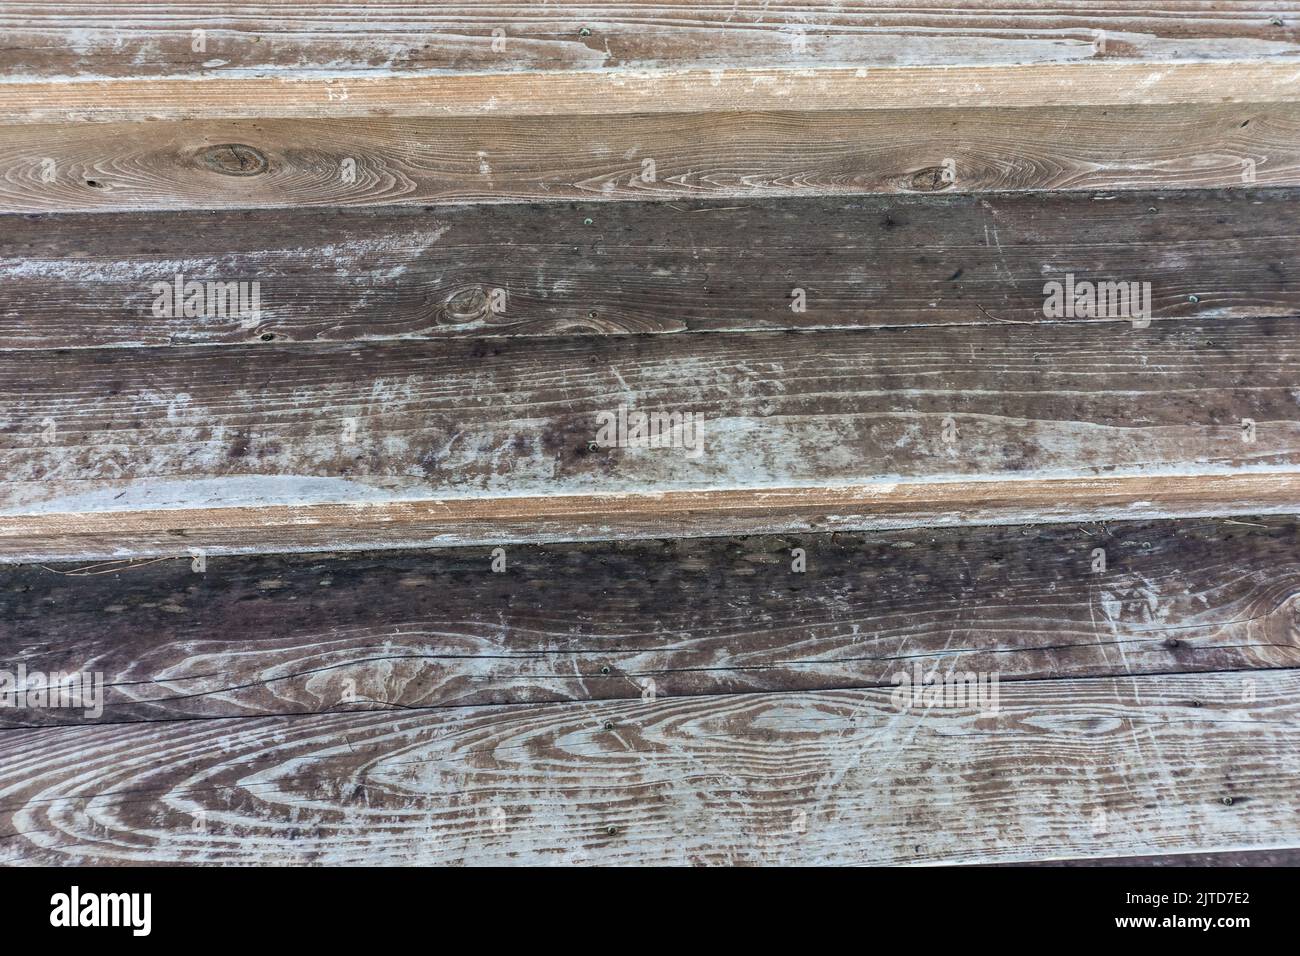 Rustic old reclaimed wood wall Stock Photo